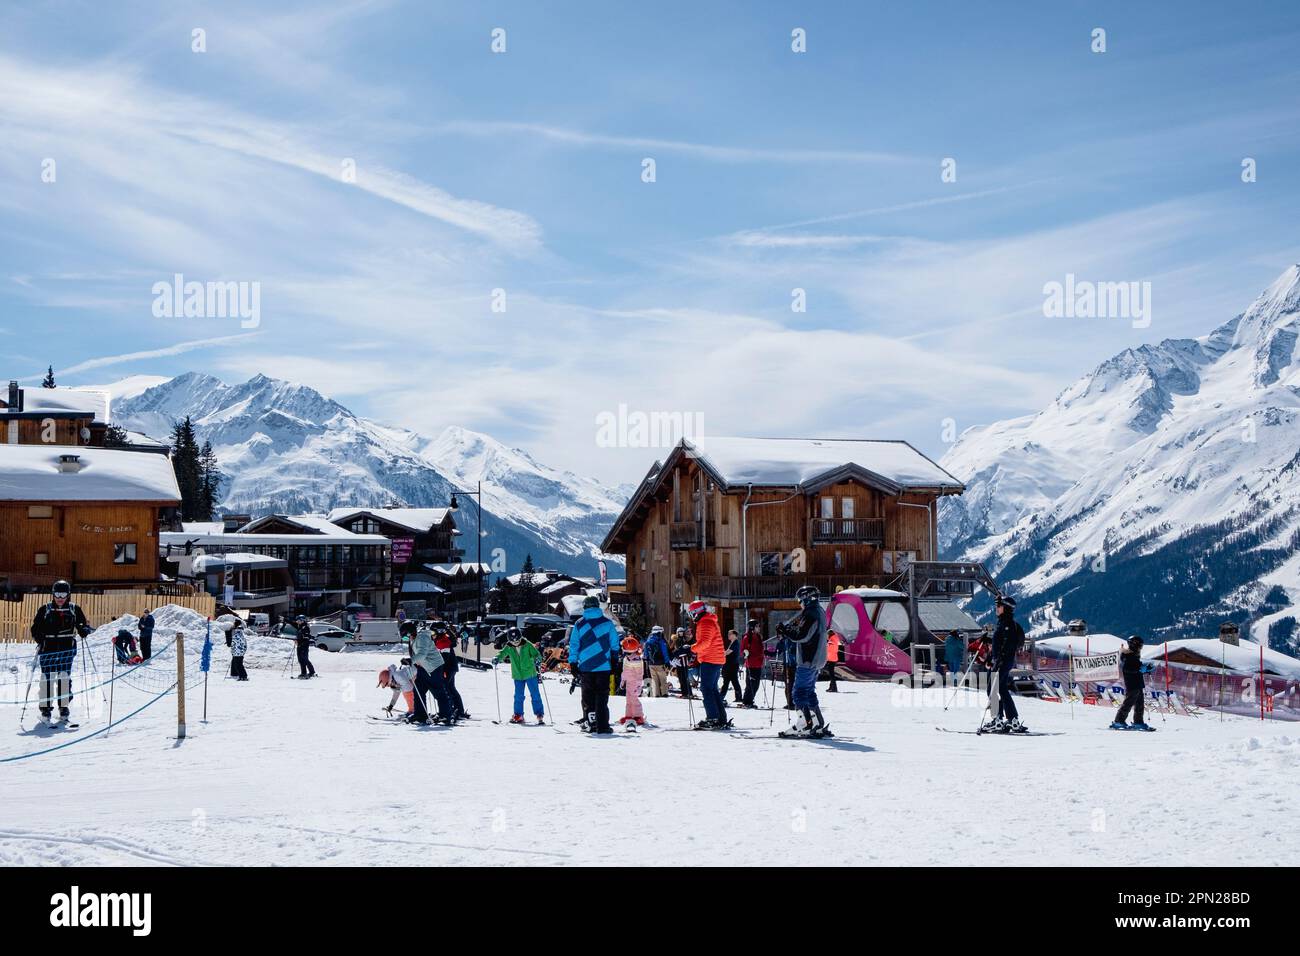 Skiers in family friendly French Alps ski resort of La Rosiere, Bourg-St-Maurice, Auvergne-Rhône-Alpes, France, Europe Stock Photo